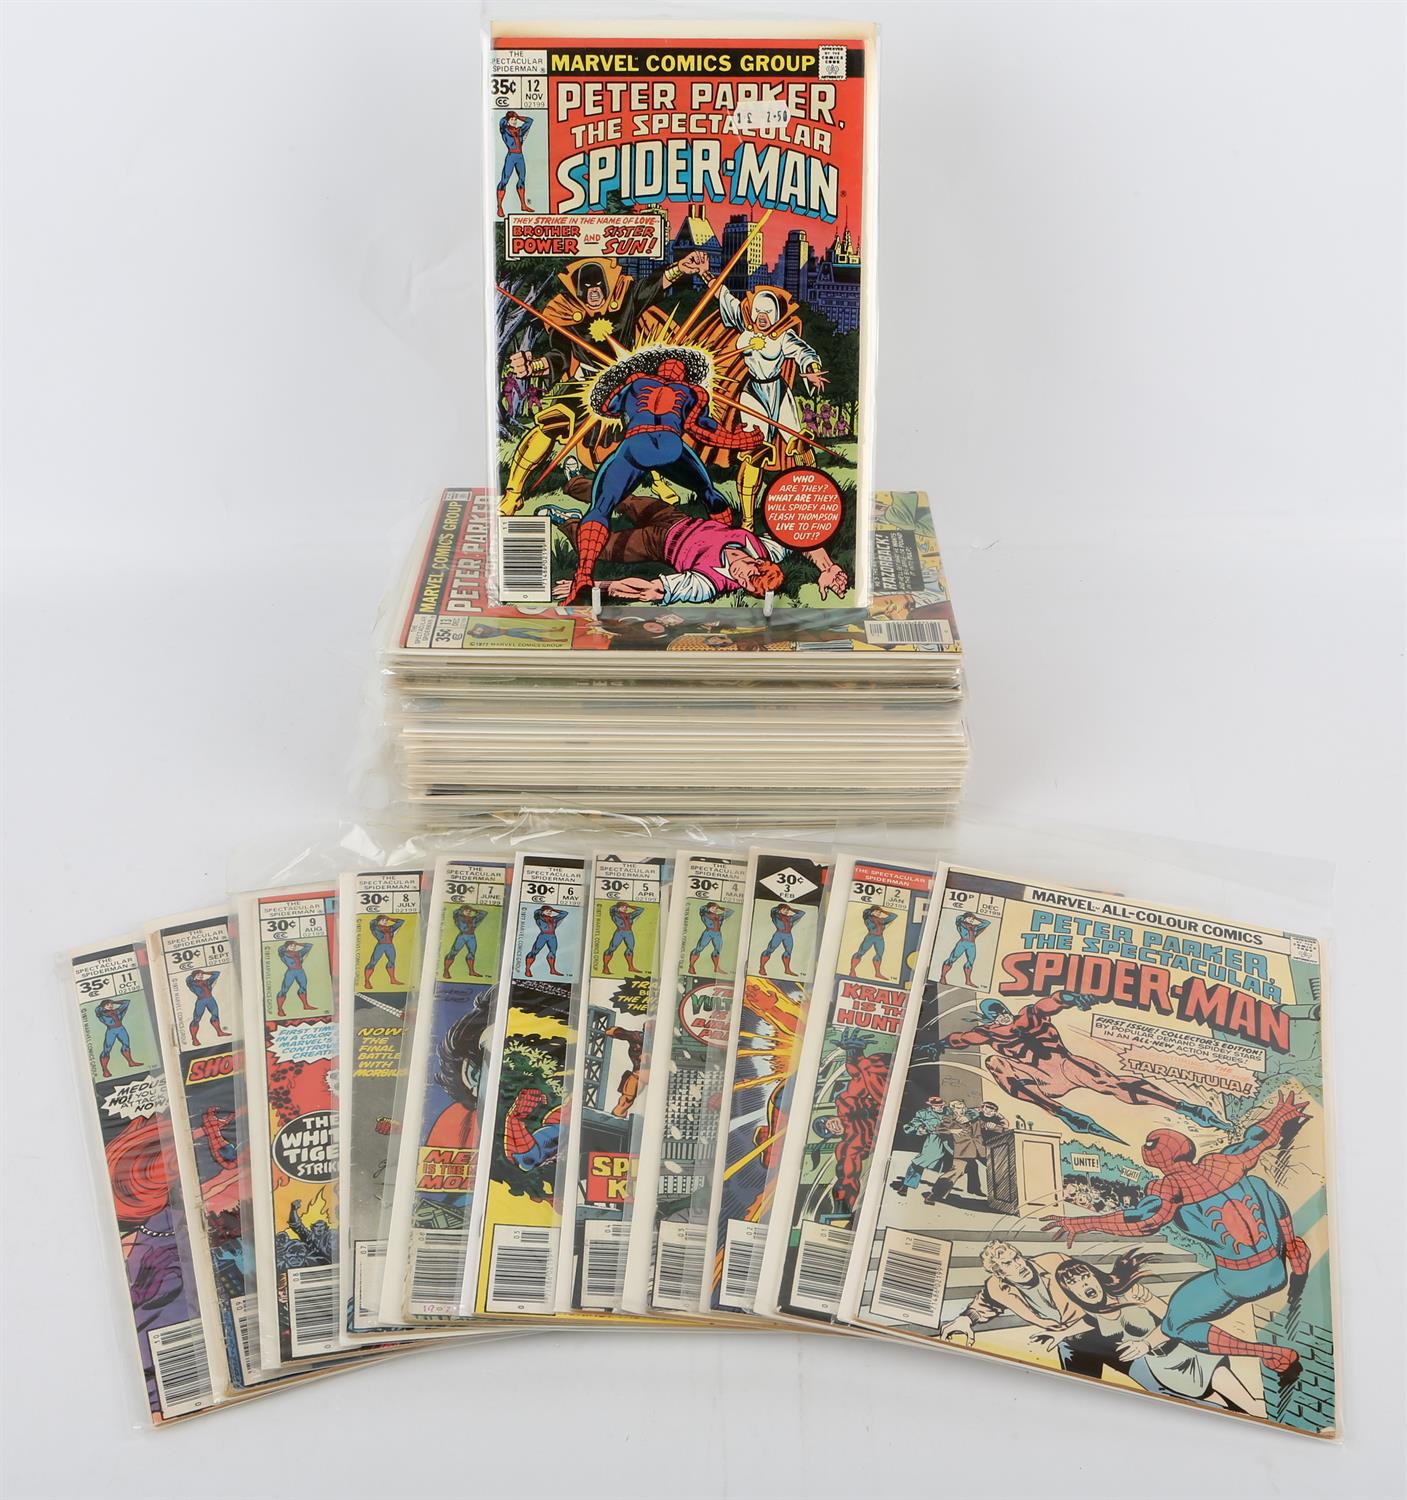 Marvel Comics: A group of 50 Peter Parker the Spectacular Spider-Man comics featuring notable